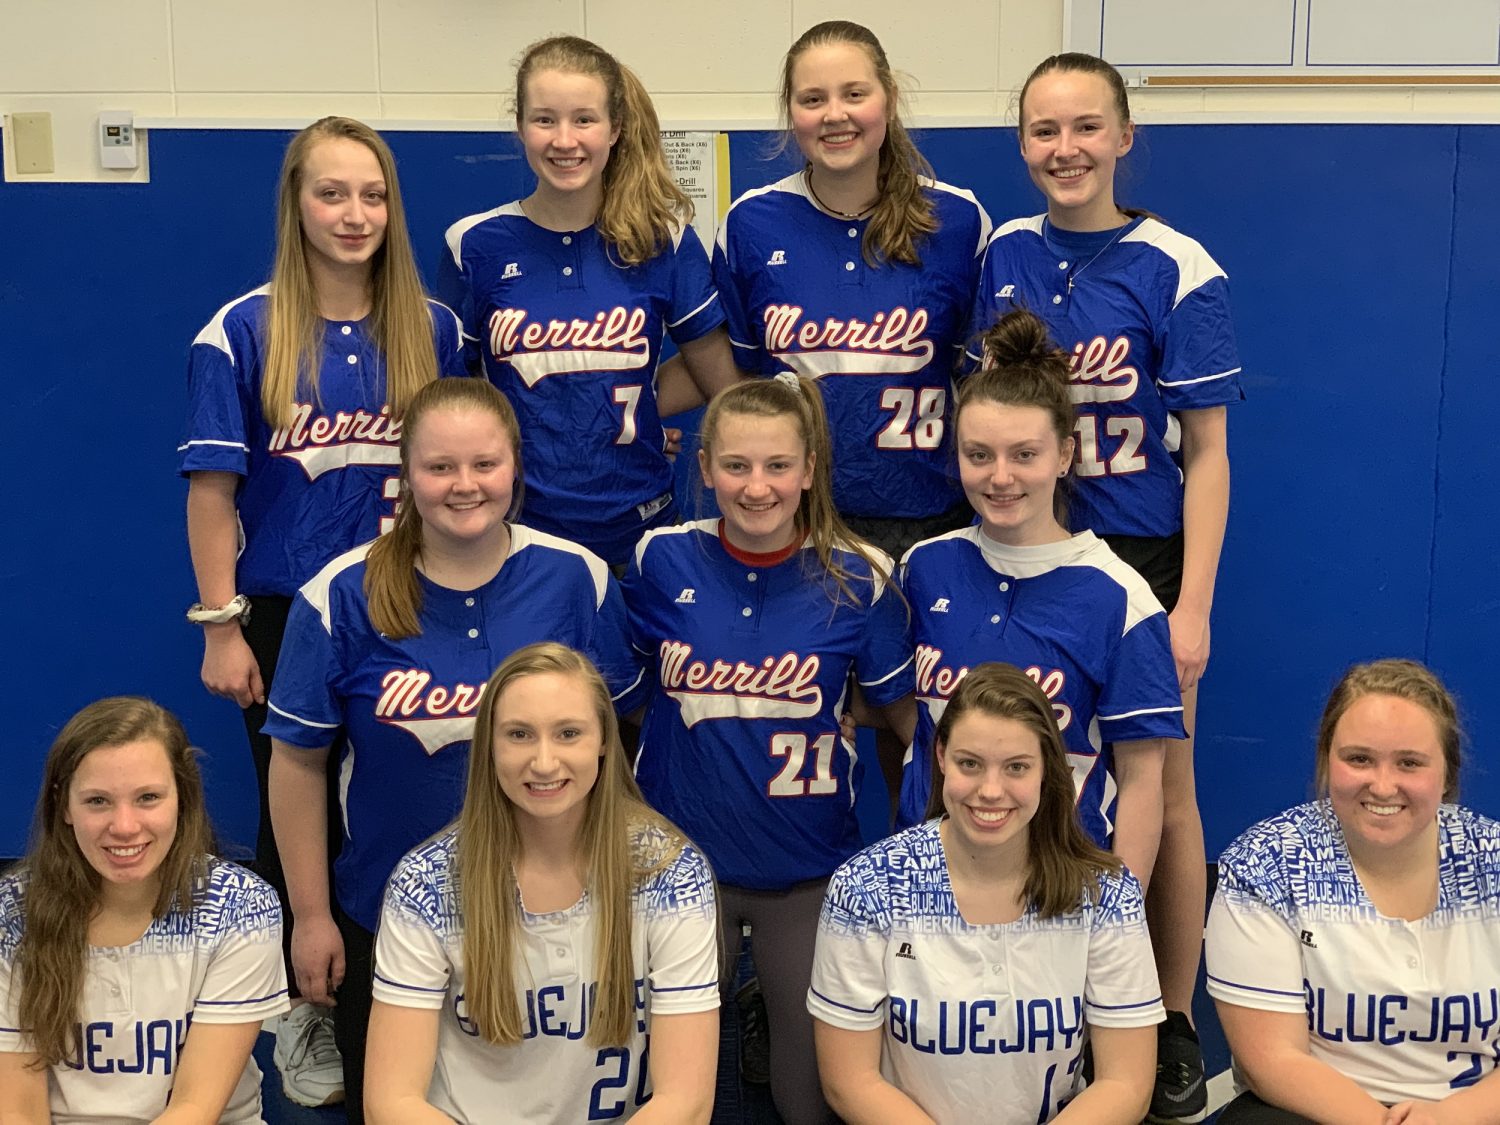 Lady Jays struggle offensively in Marshfield loss